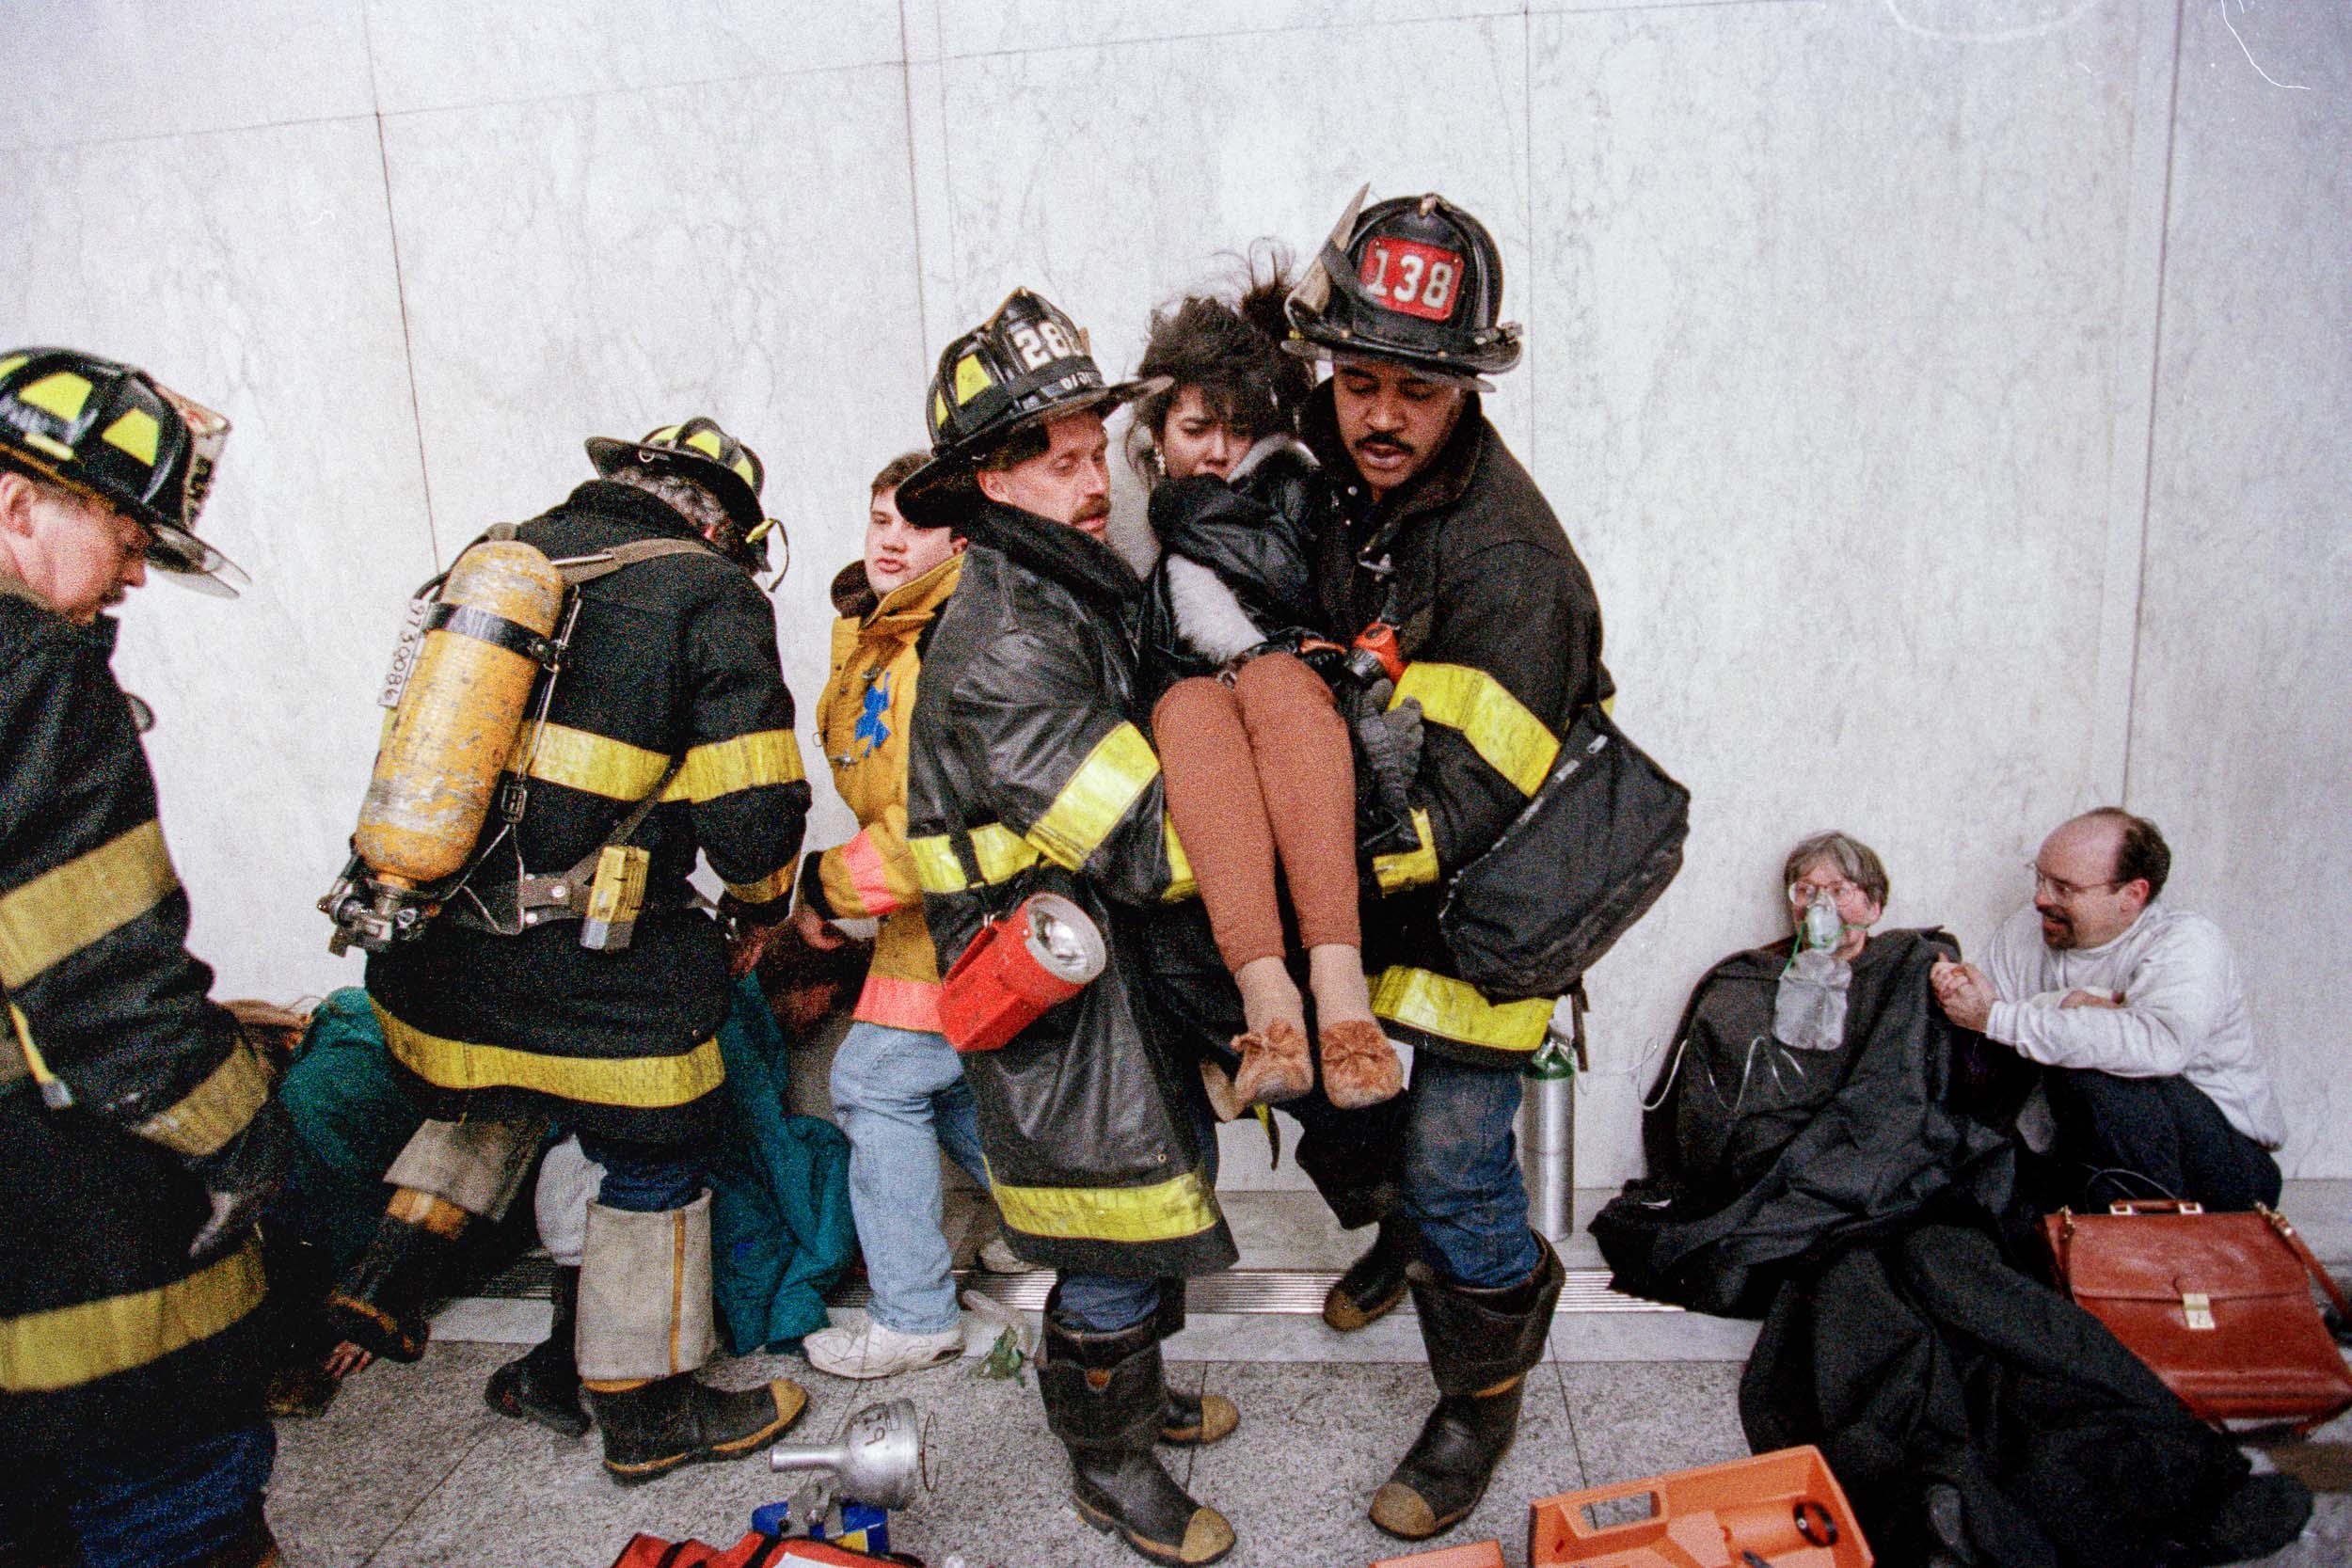 An office worker getting carried by 2 firemen in the lobby of the World Trade Center, NY, 1993